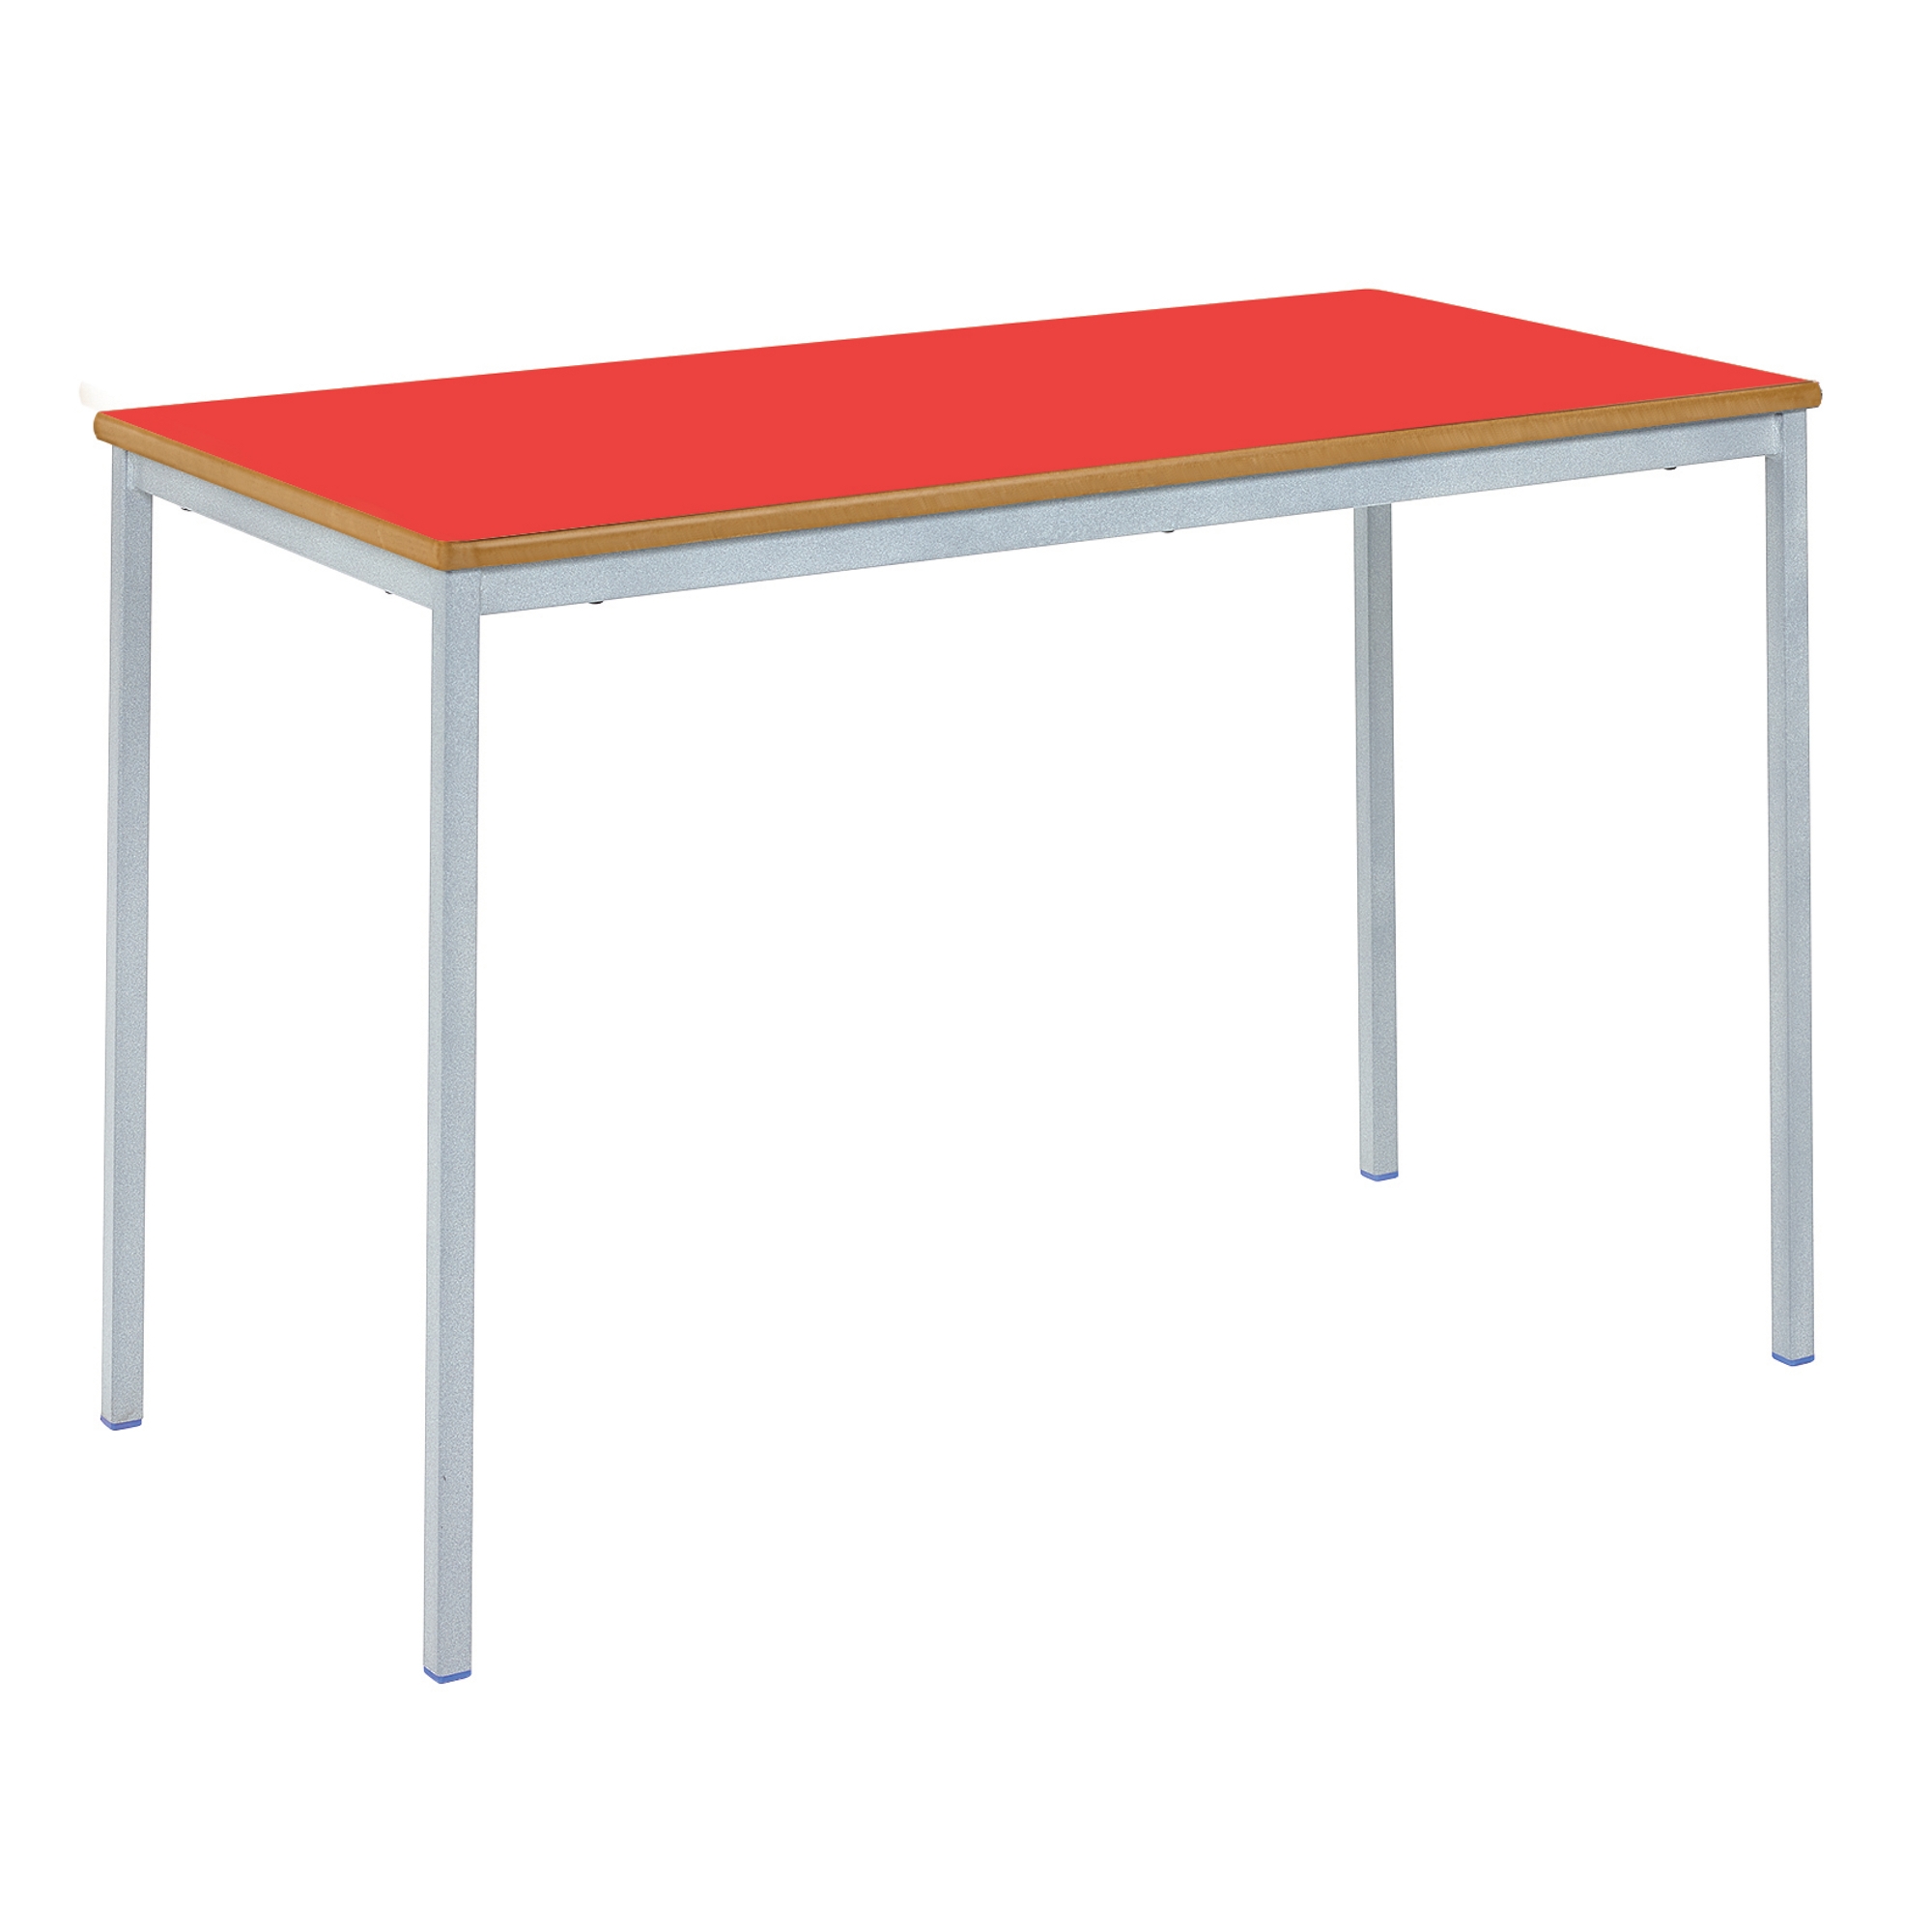 Classmates Rectangular Fully Welded Classroom Table - 1100 x 550 x 460mm - Red